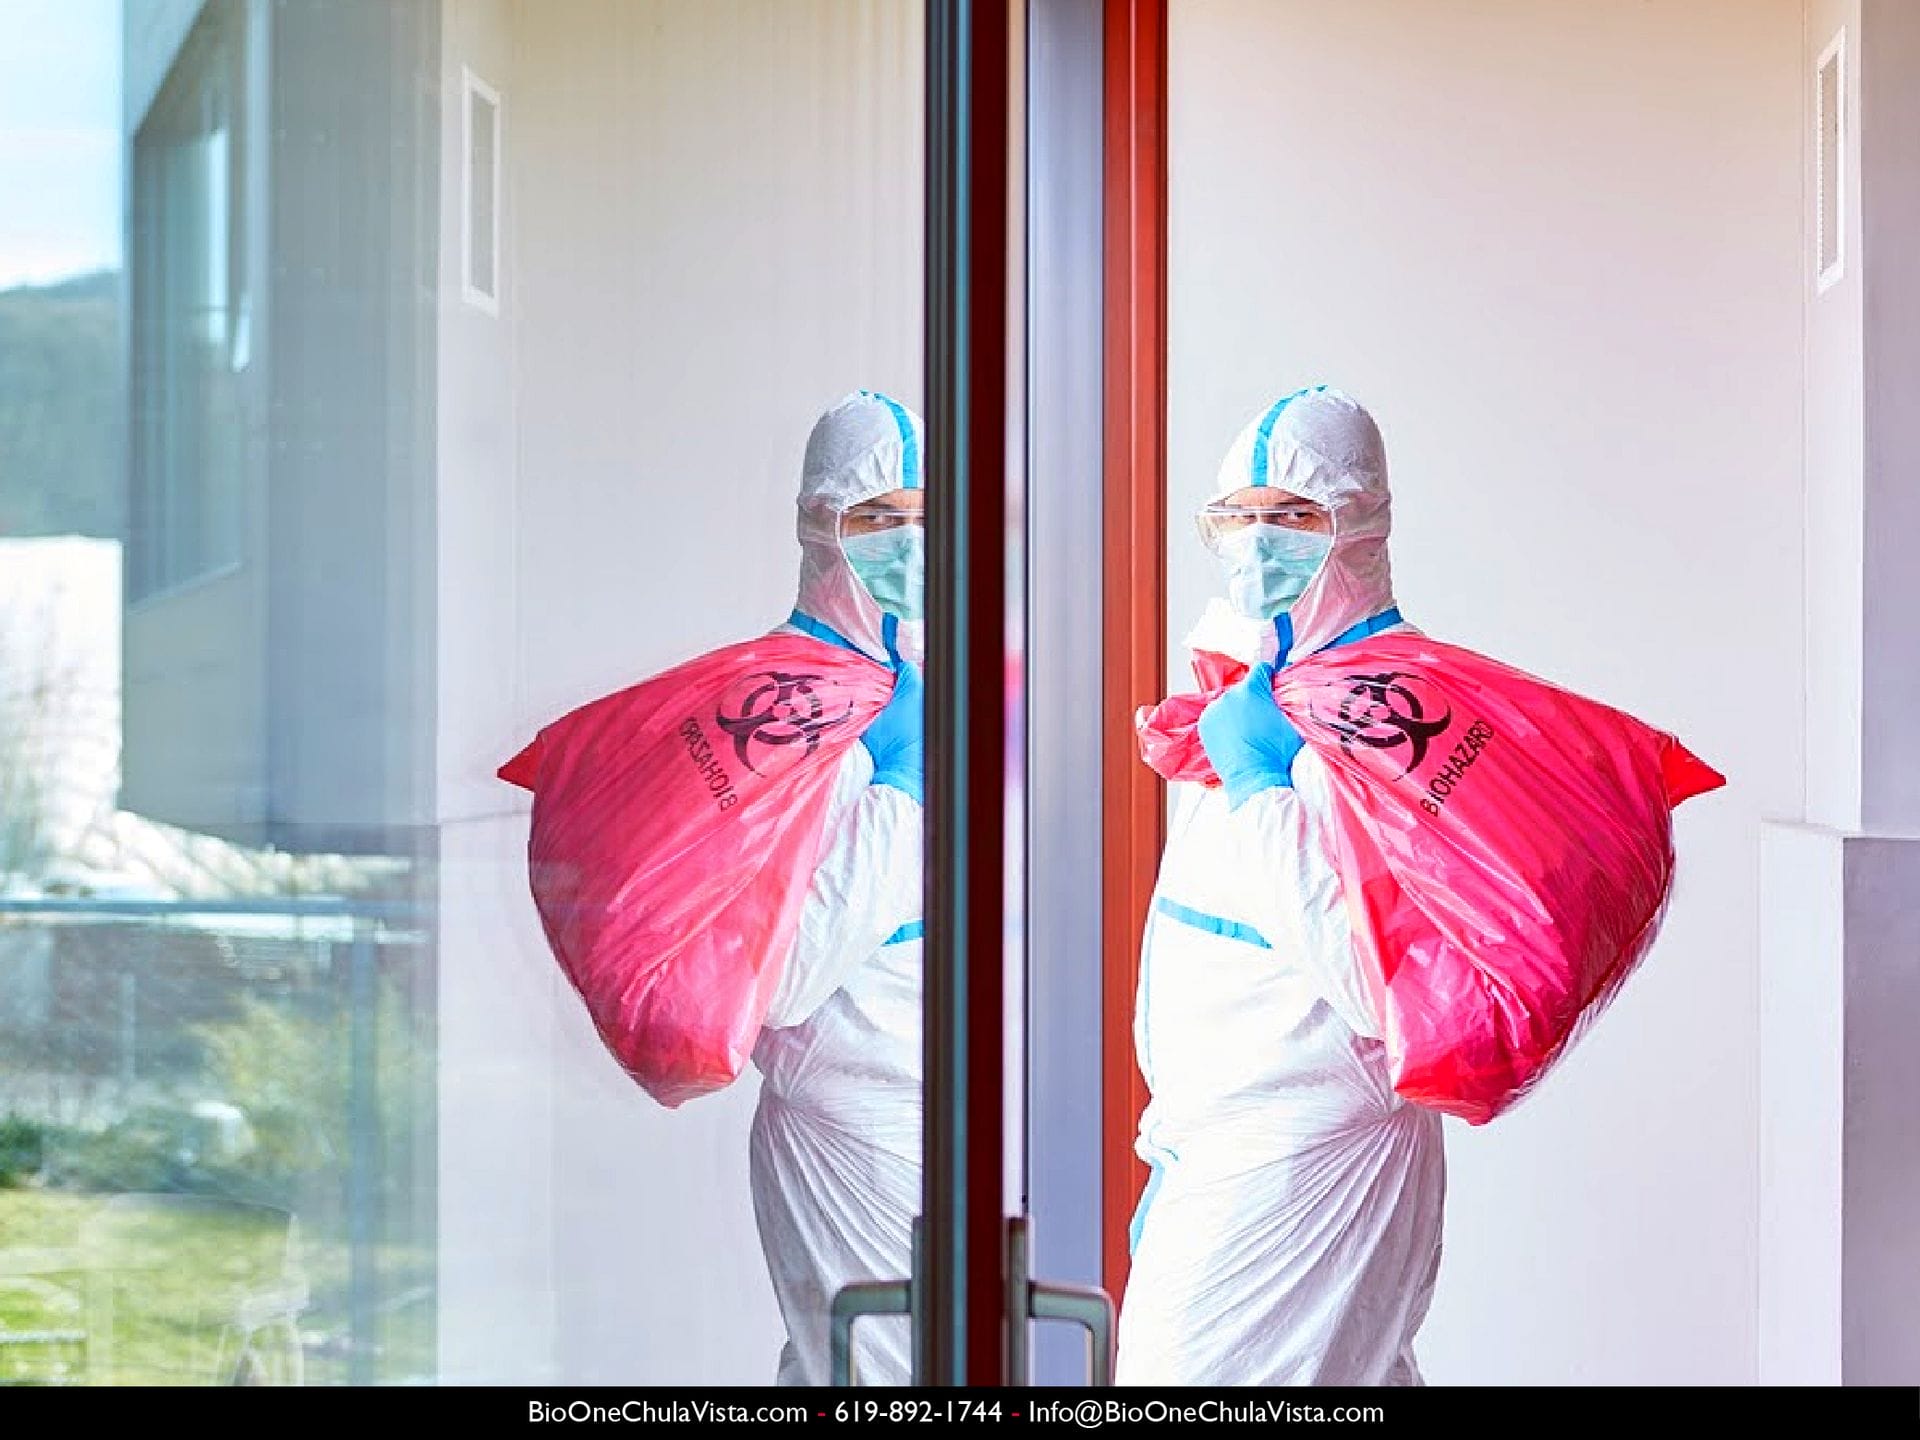 Image shows technician fully dressed in PPE as he takes red bag of biohazard waste.